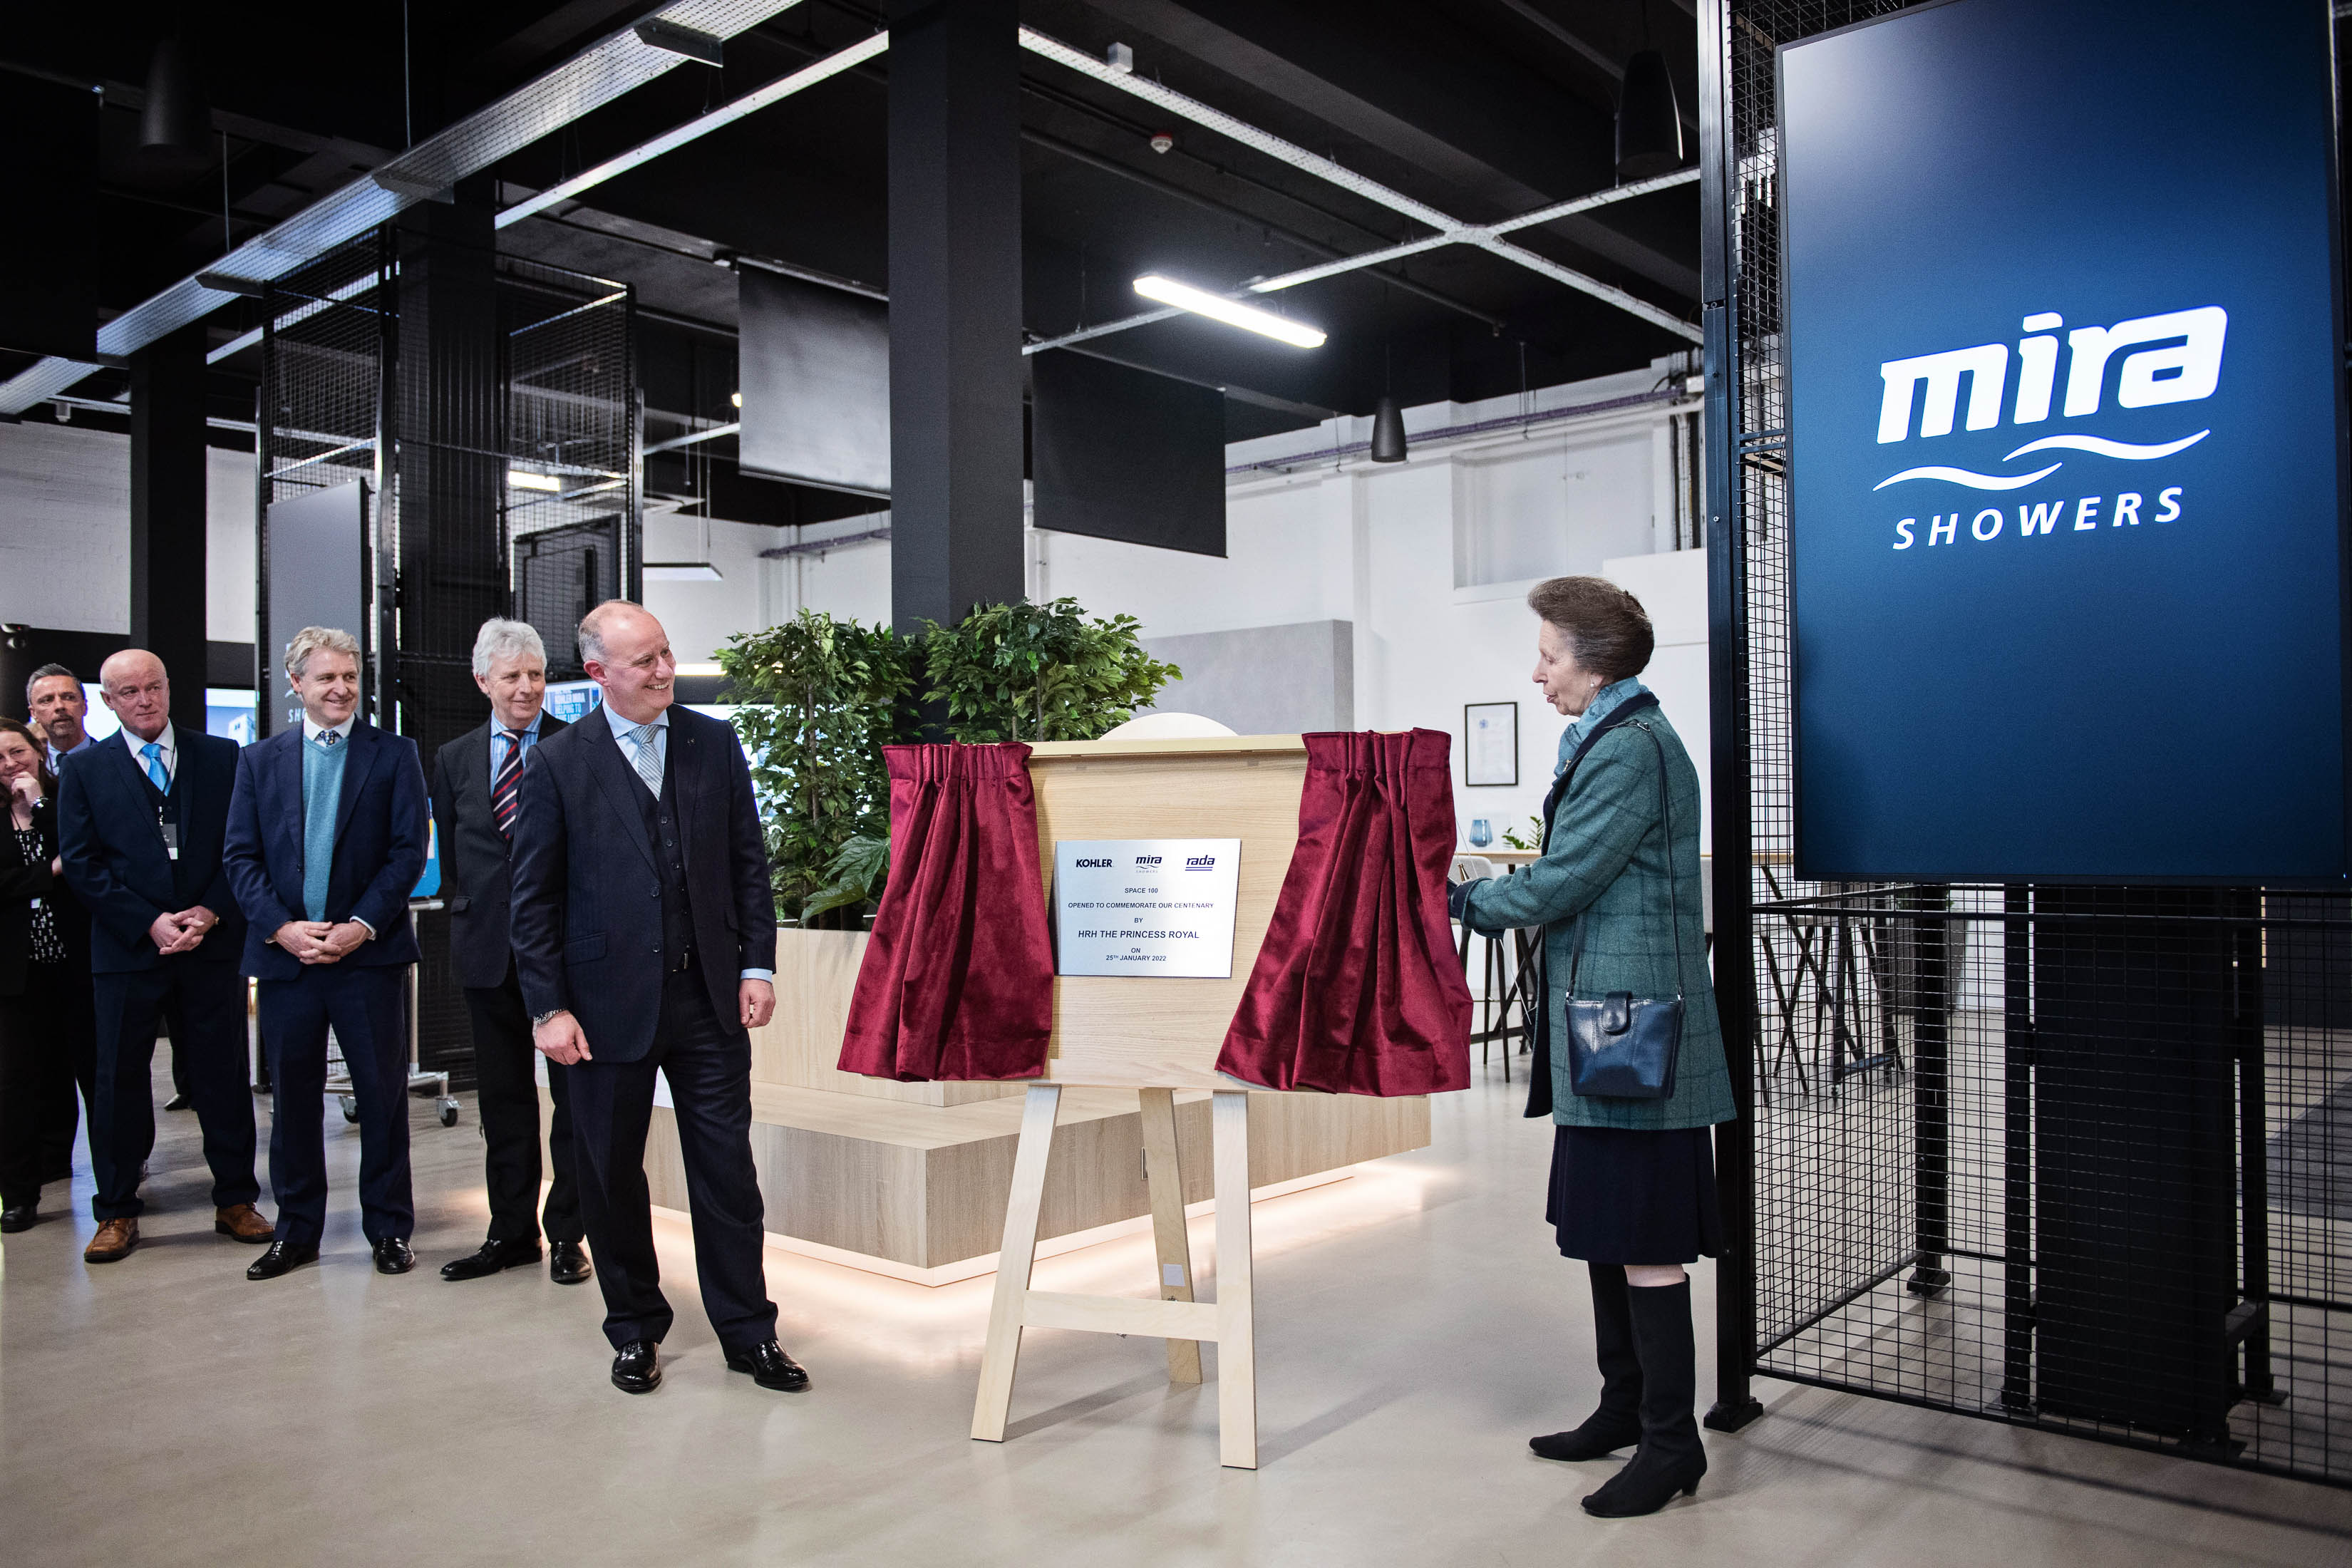 Her Royal Highness Princess Royal officially opening Space 100 at MIRA Showers